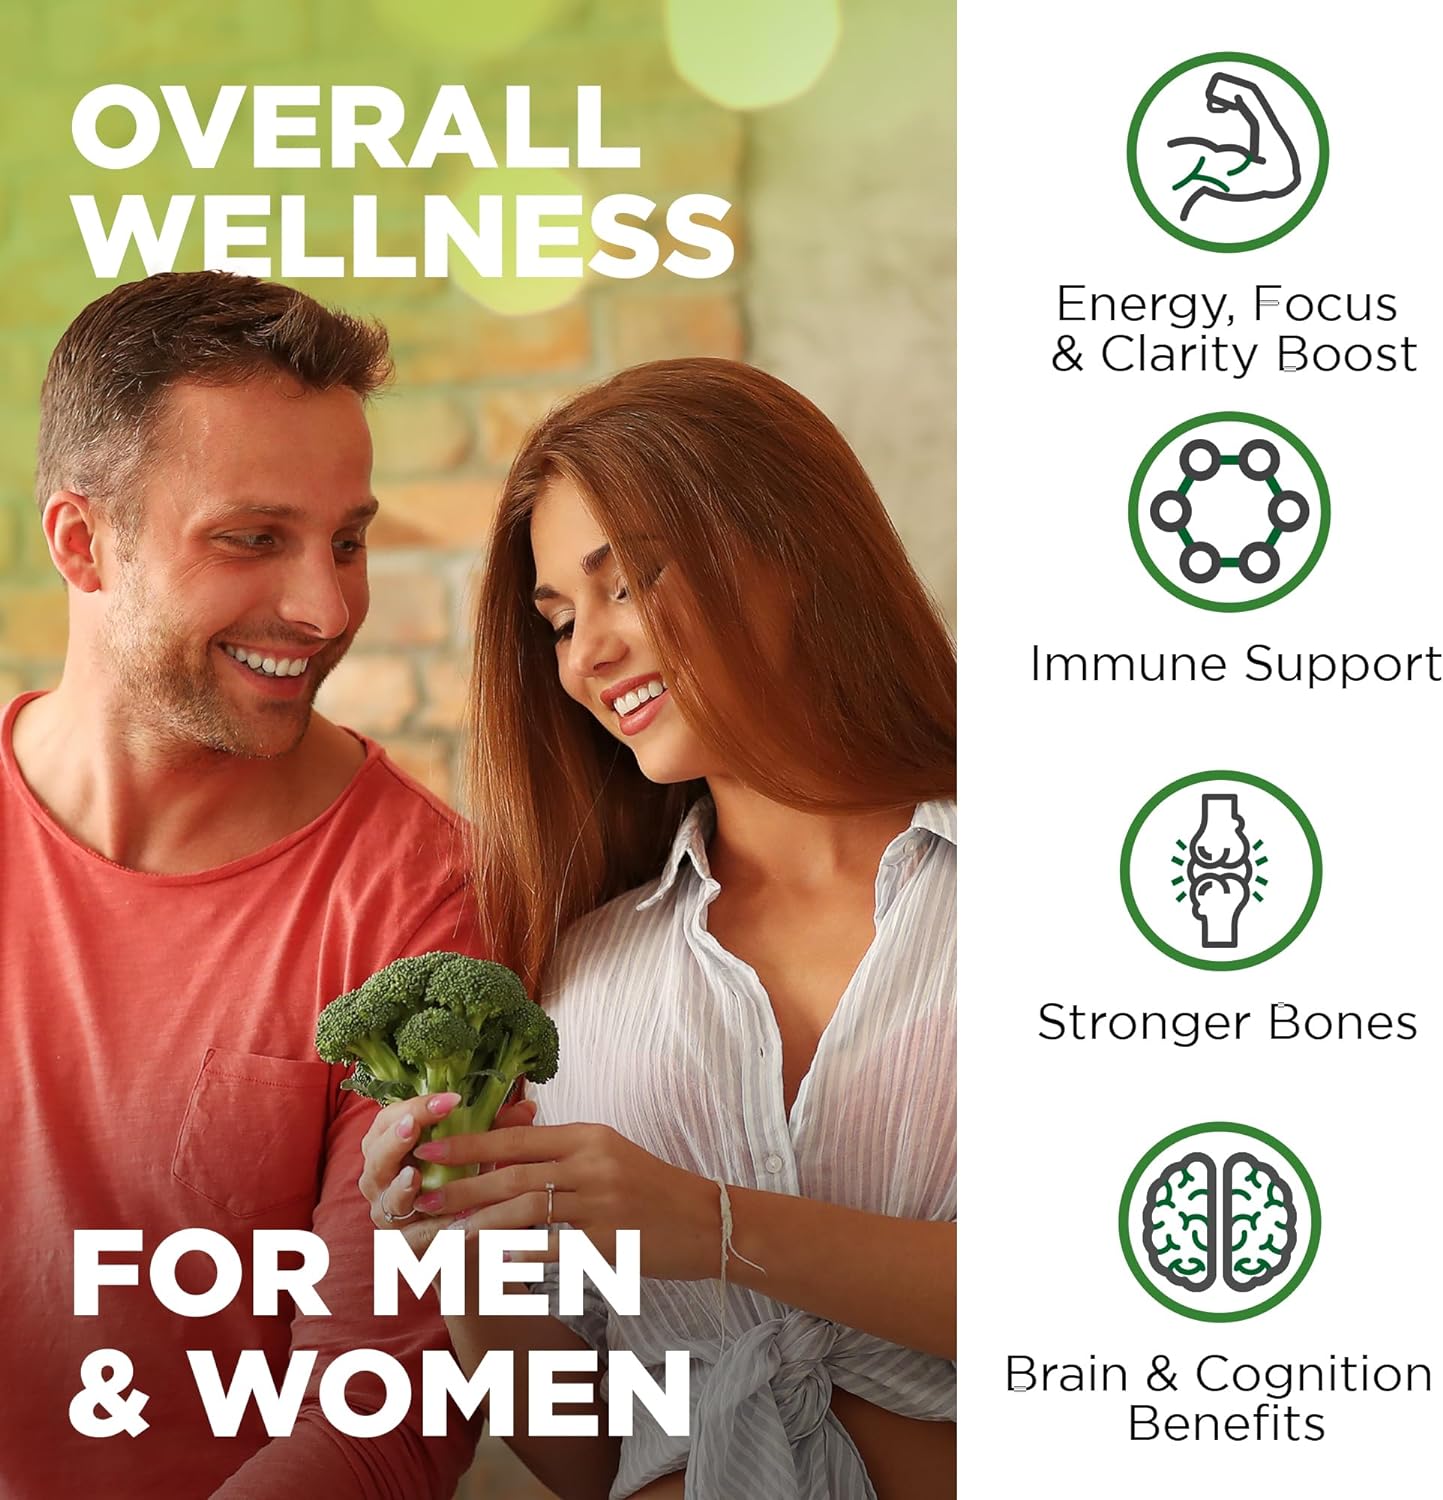 Nutrivein Whole Food Multivitamin - Complete Daily Vitamins for Men and Women from Natural Whole Foods, Real Raw Veggies, Fruits, Vitamin E, A, B Complex - 30 Day Supply (120 Capsules, Four Daily) : Health & Household